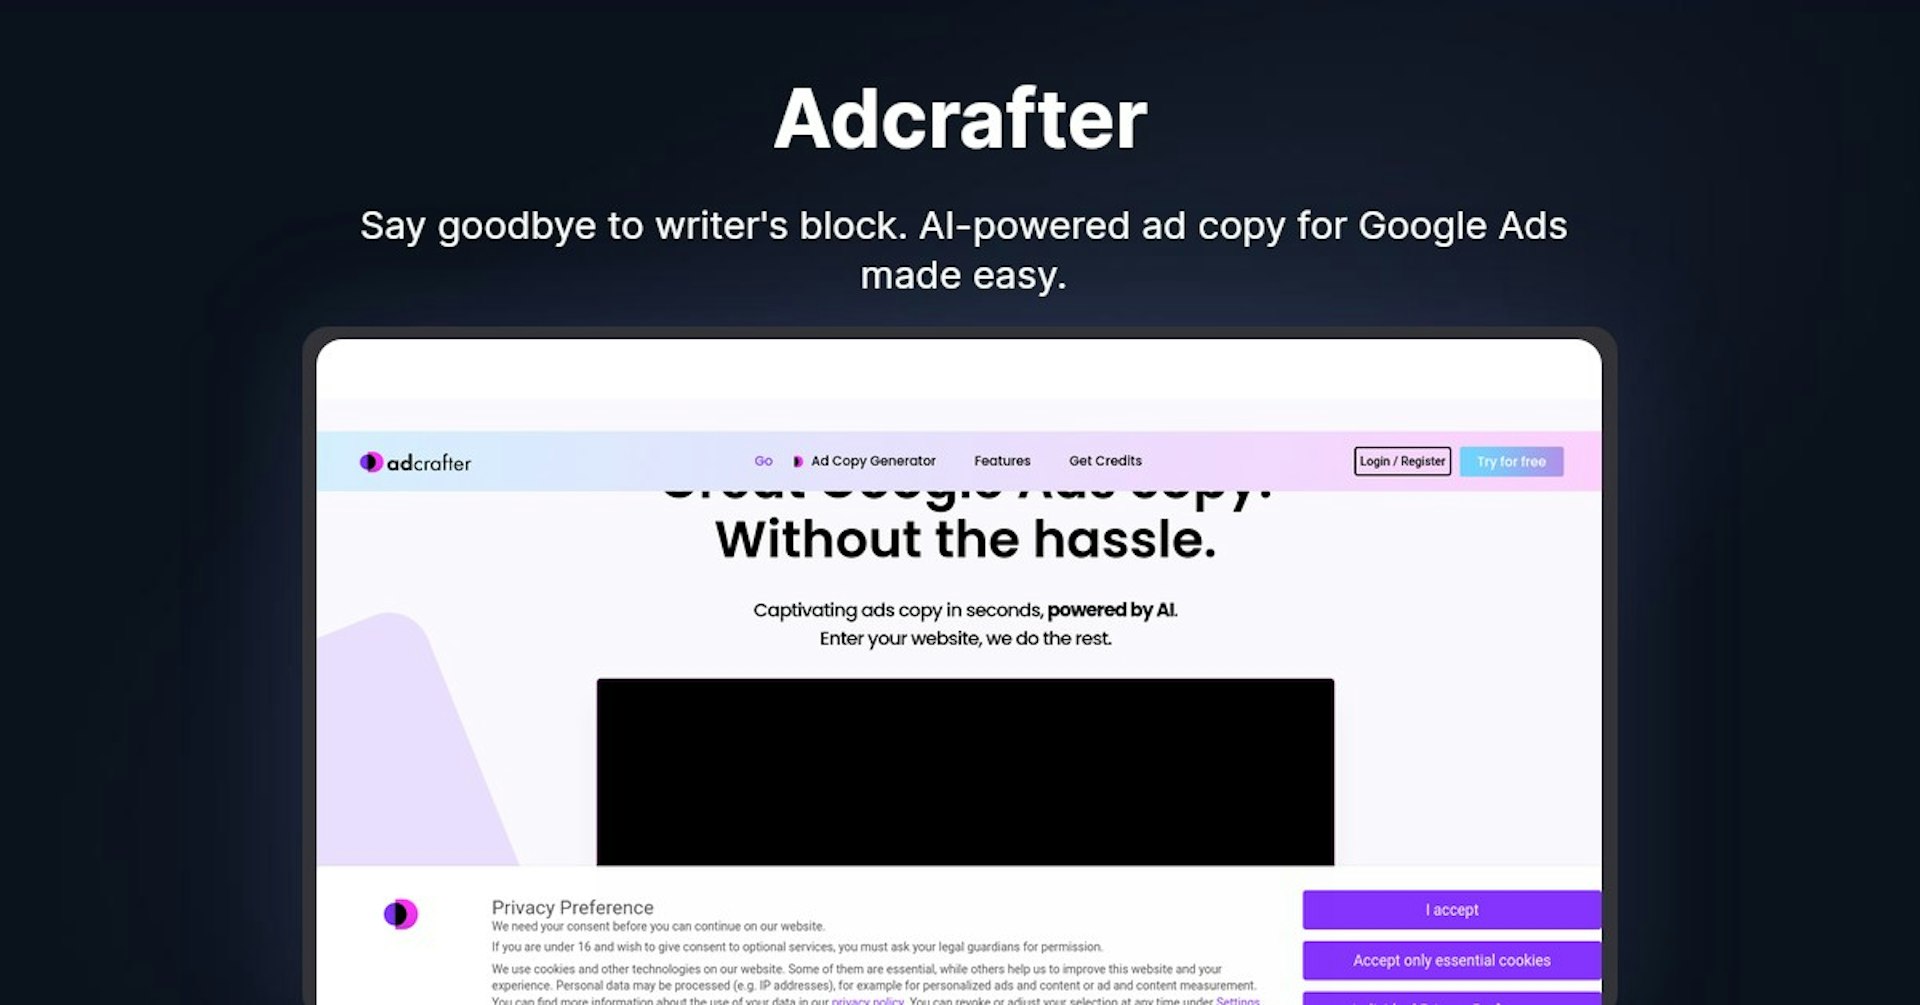 Adcrafter